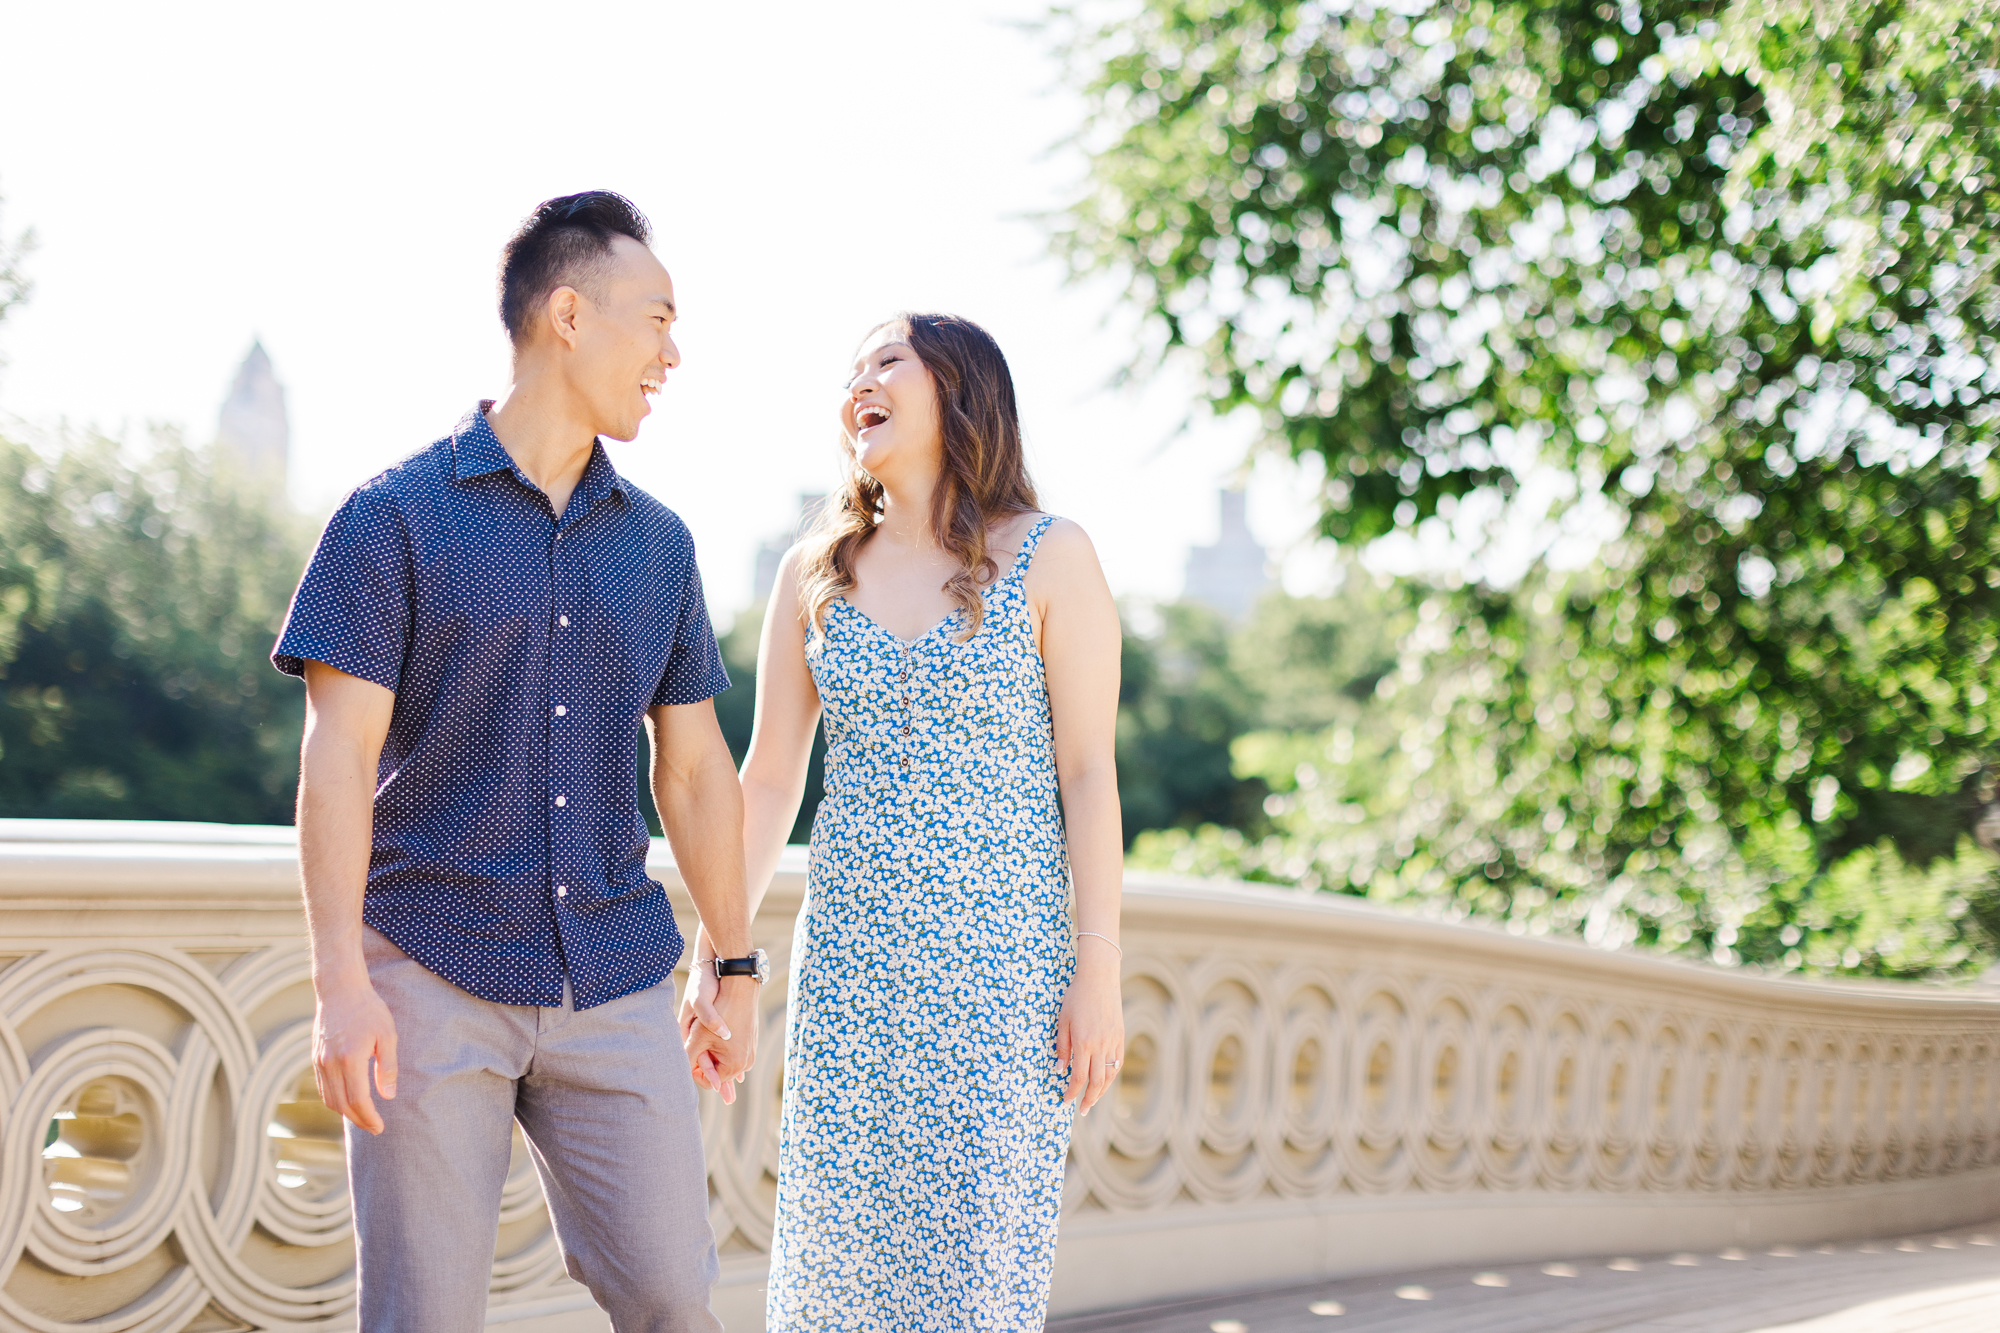 Pretty Engagement Photos in Central Park, New York